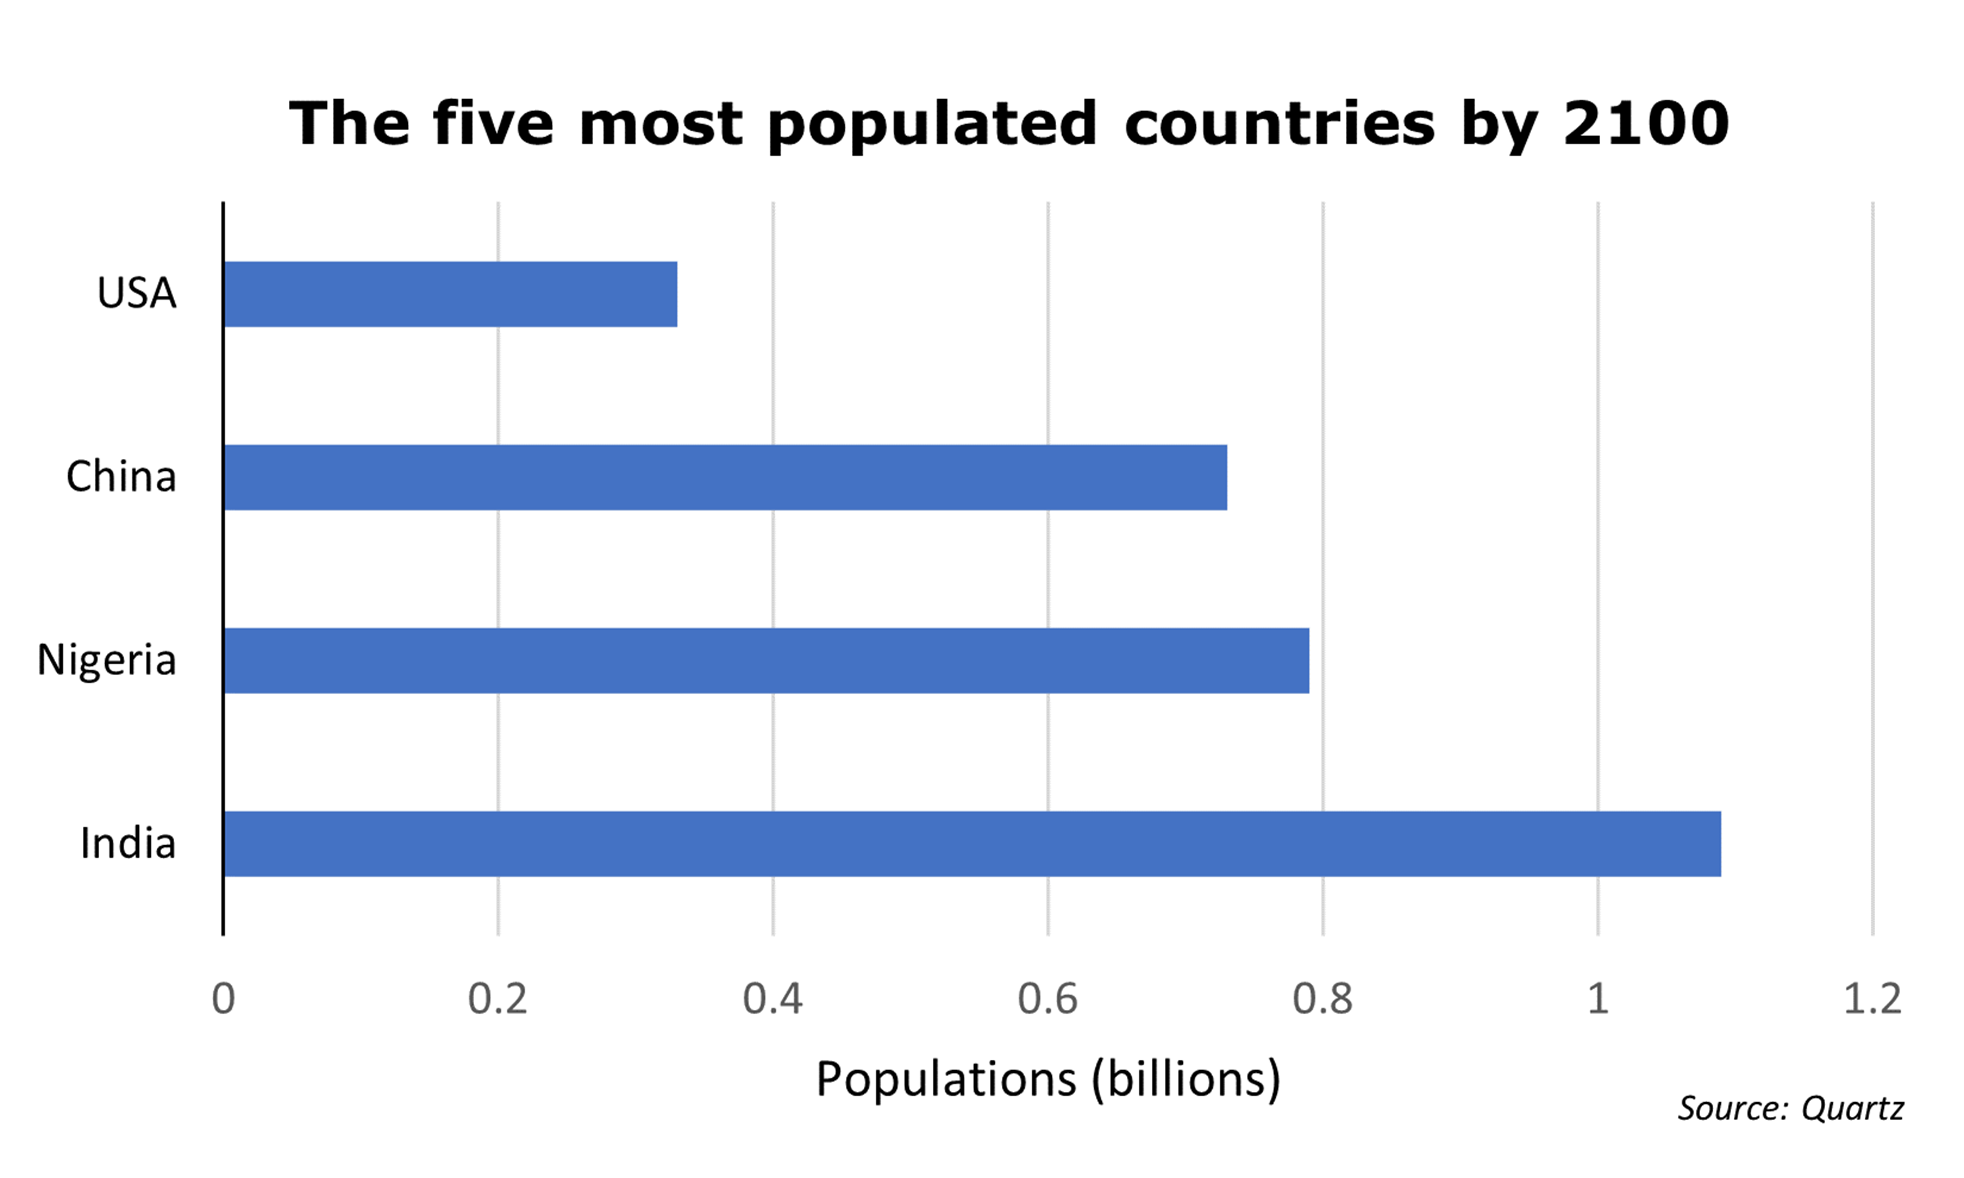 Figure of the 5 most populated countries by 2100